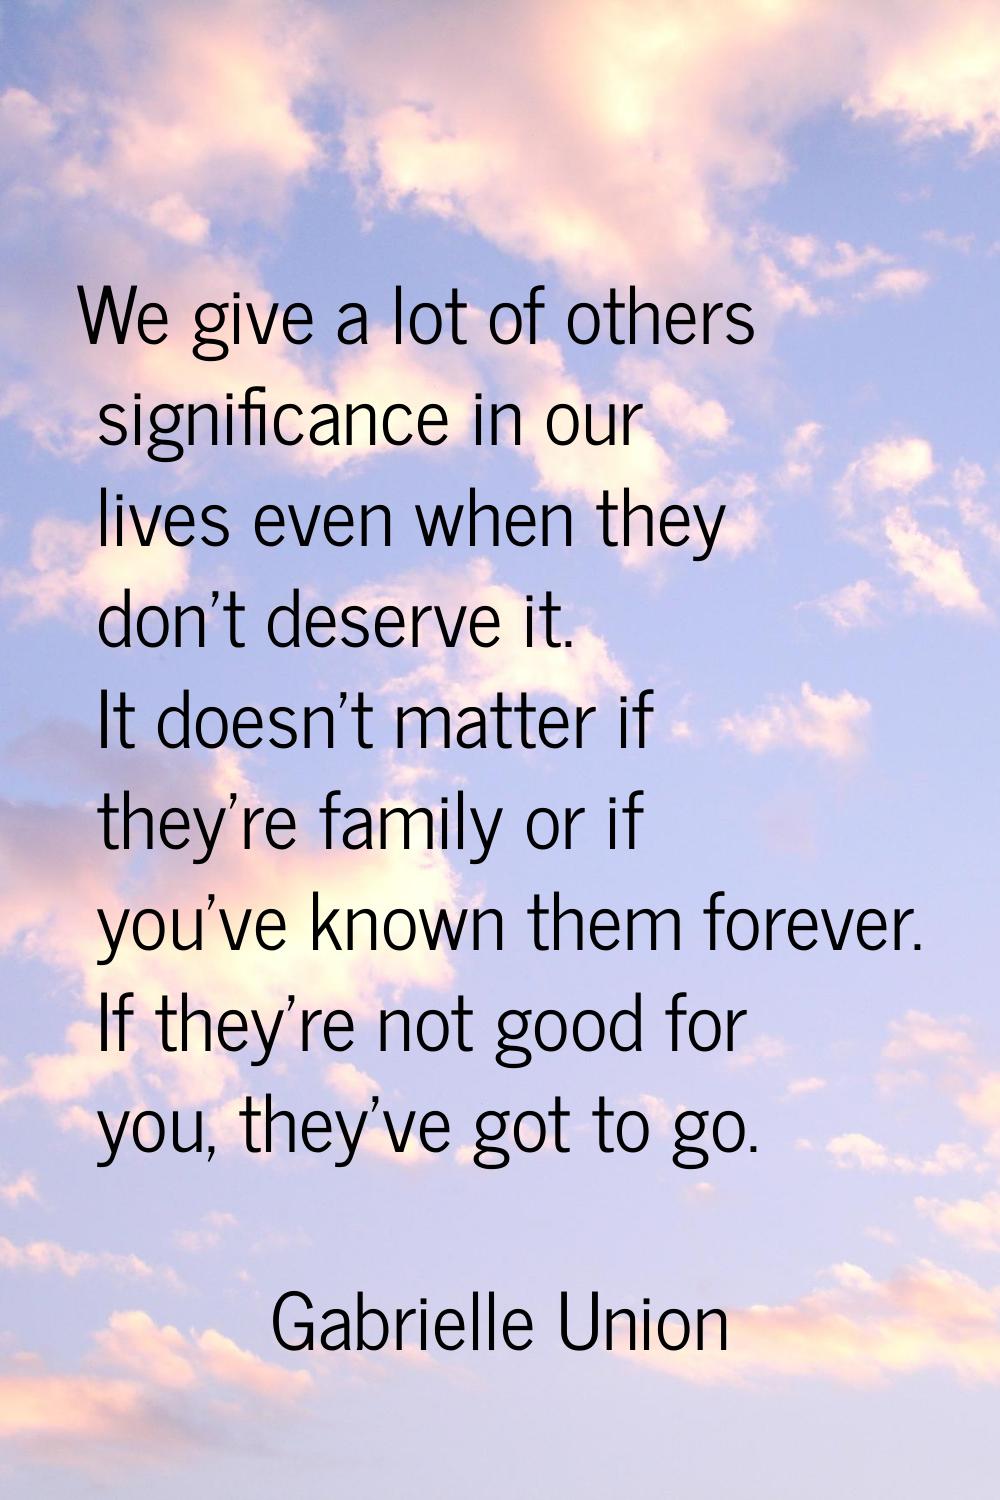 We give a lot of others significance in our lives even when they don't deserve it. It doesn't matte